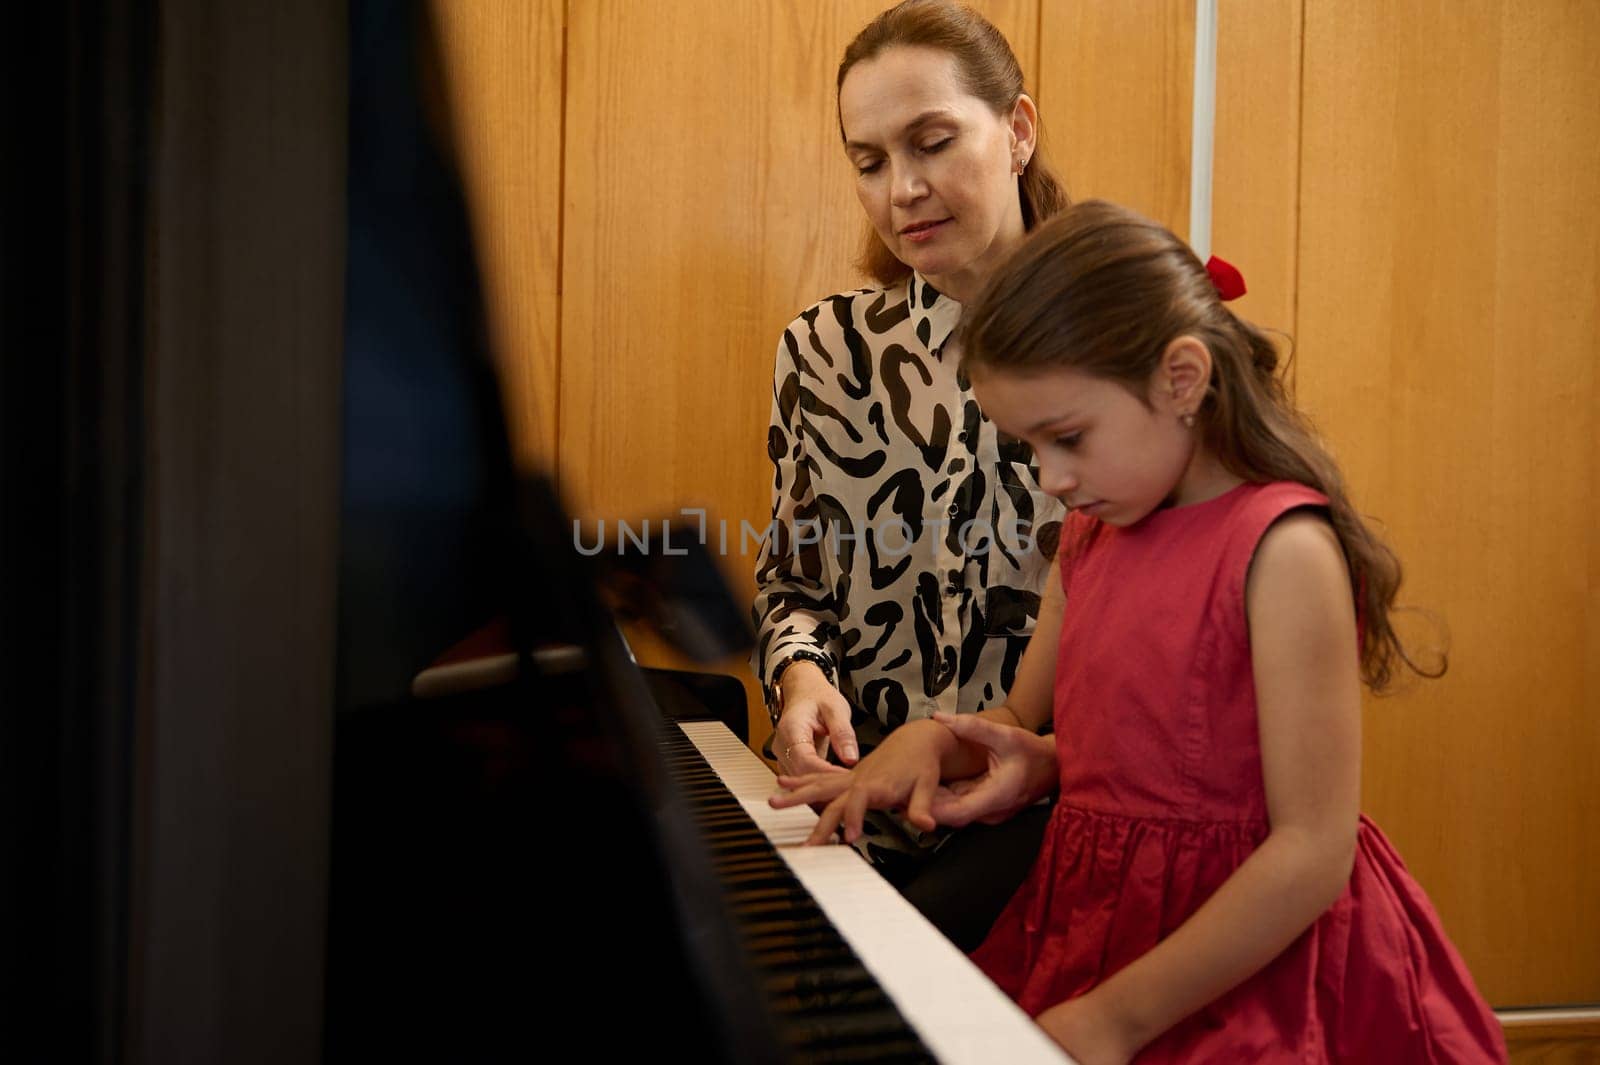 Adorable little girl in red dress, taking piano lesson, passionately playing the keys under her teacher's guidance, feeling the rhythm of melody. Musical education and talent development in progress